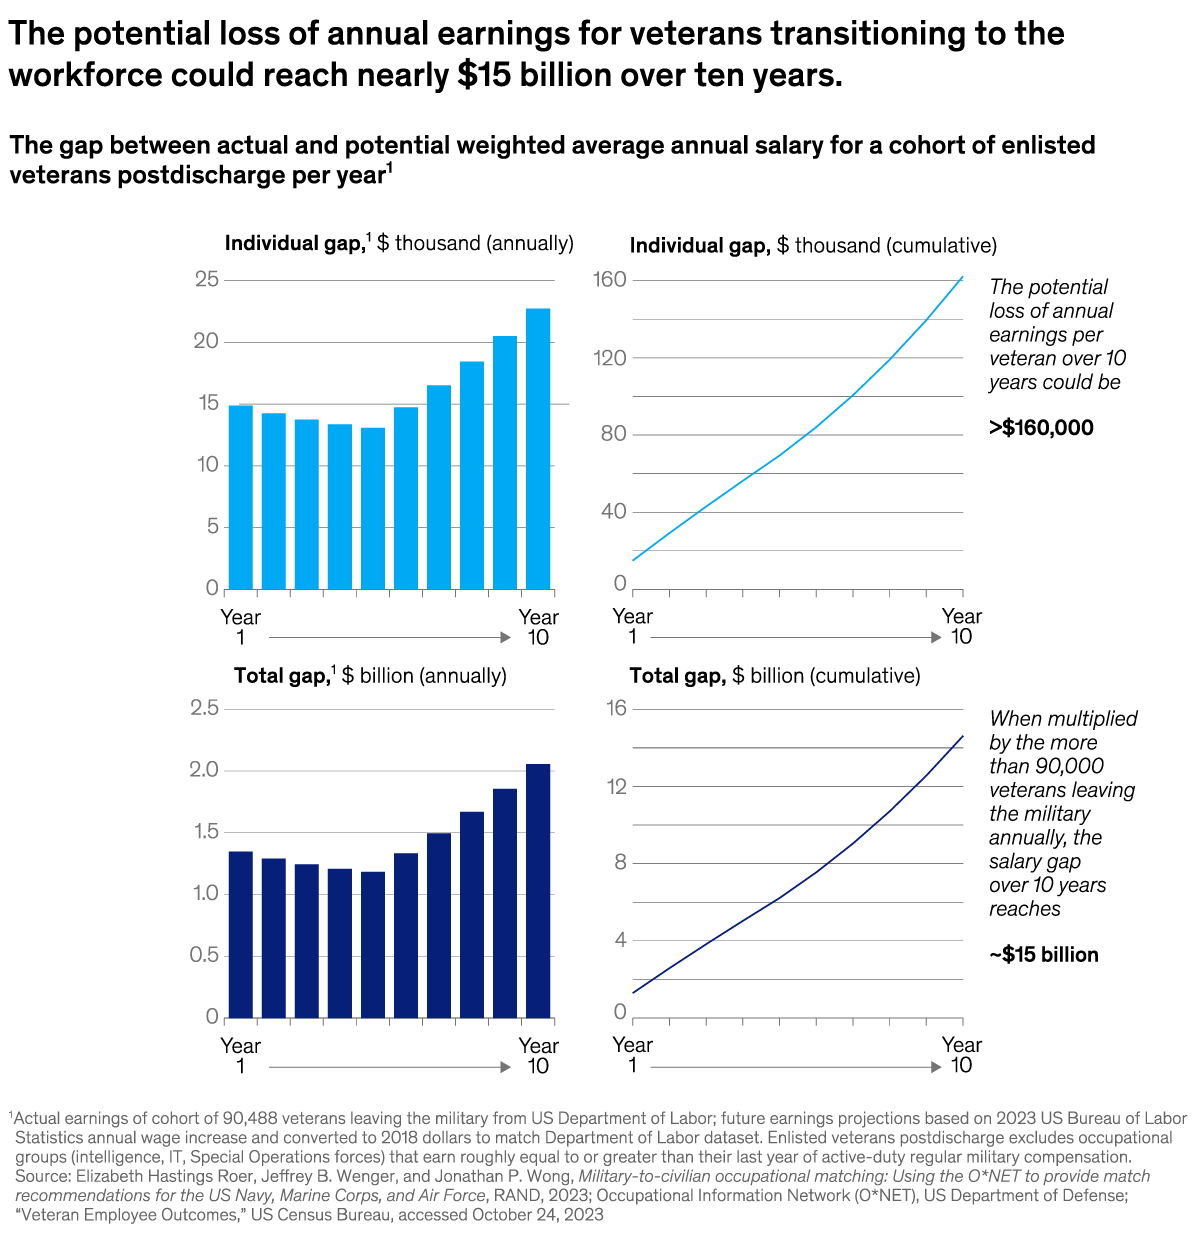 A chart titled “The potential loss of annual earnings for veterans transitioning to the workforce could reach nearly $15 billion over ten years.” Click to open the full article on McKinsey.com.